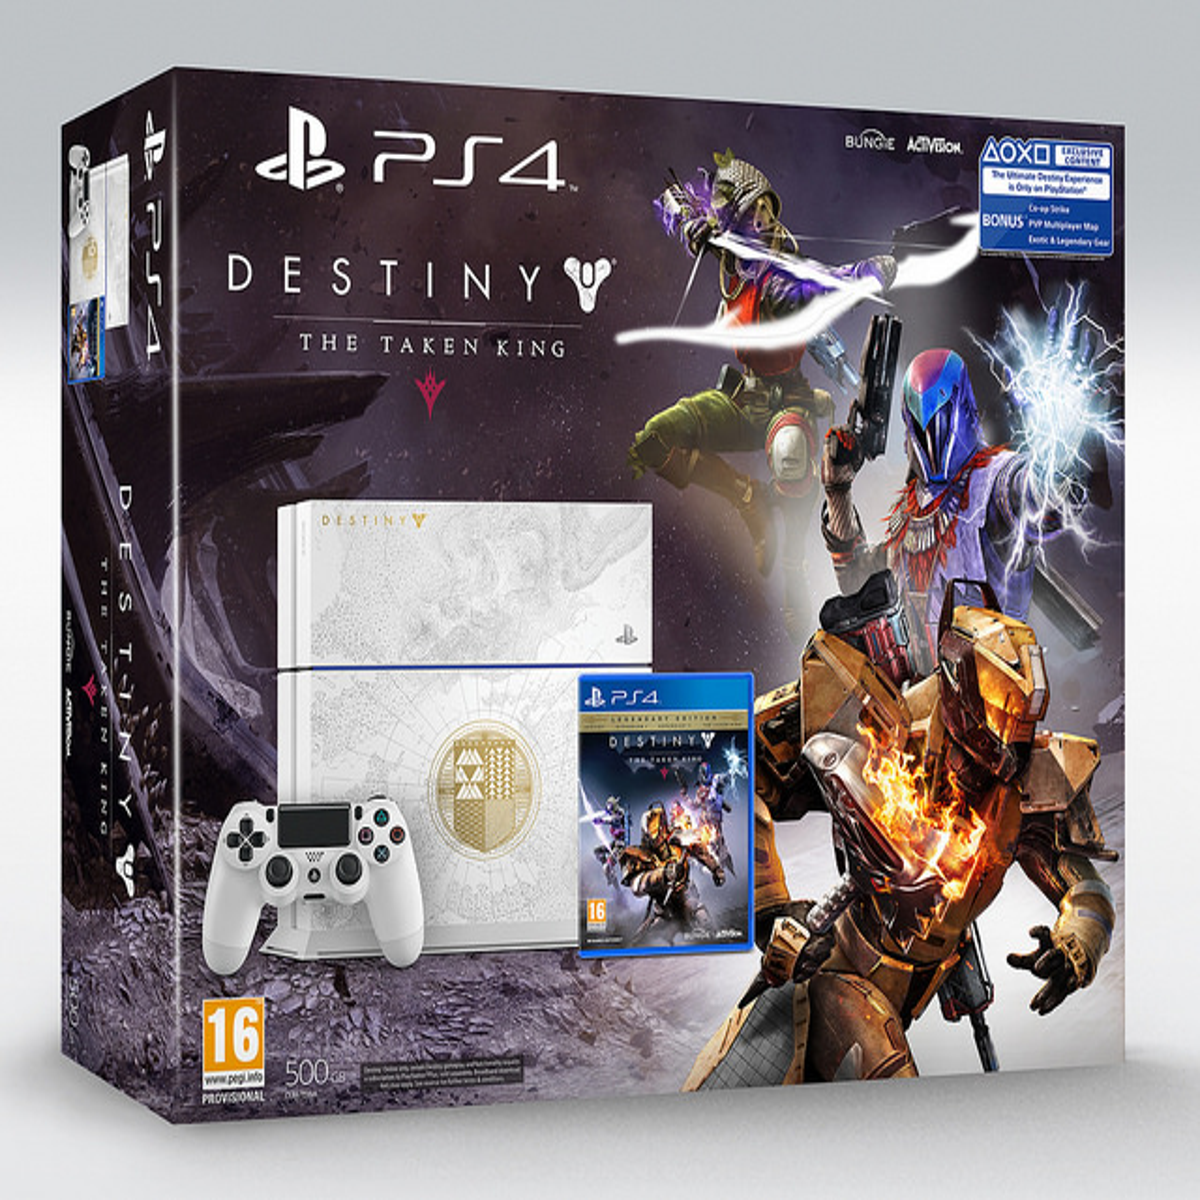 Making Post At vise Bungie Day - Destiny: The Taken King Limited Edition PS4 out in September |  VG247